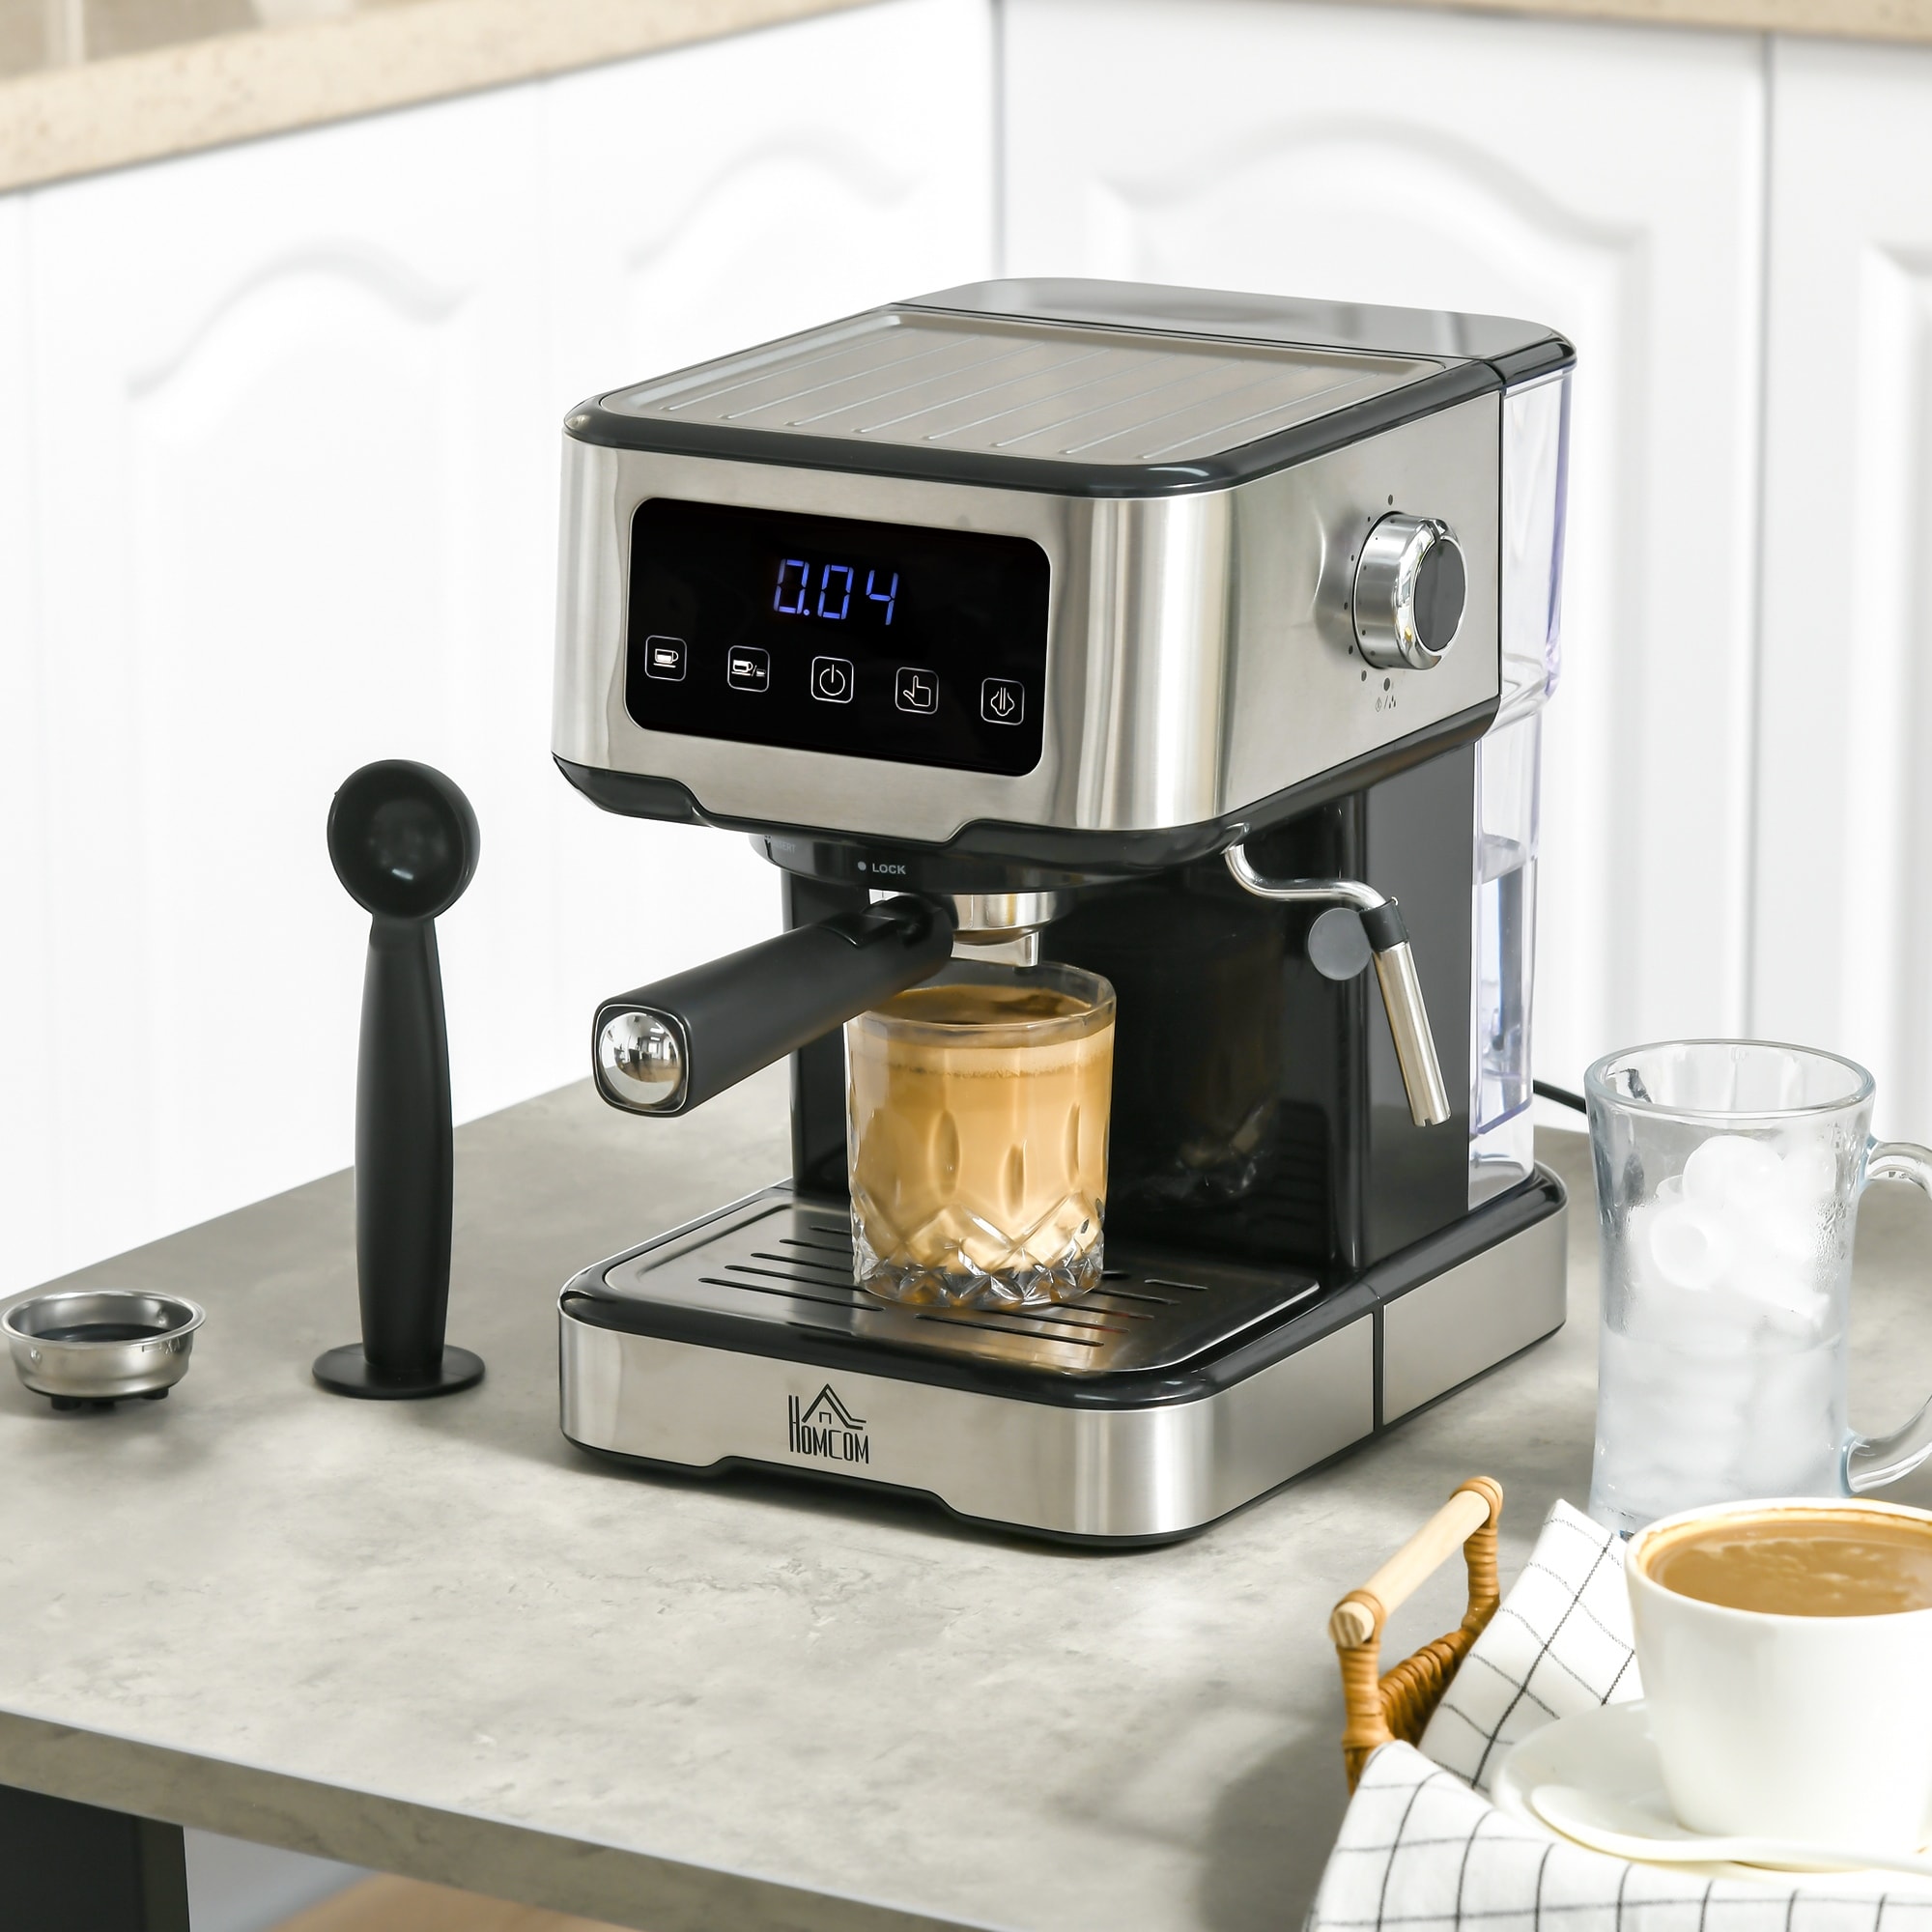 https://ak1.ostkcdn.com/images/products/is/images/direct/fe0d088ca172bd2e226a4f8214b61981fcb1c18b/HOMCOM-Espresso-Machine-with-Milk-Frother-Wand%2C-15-Bar-Pump-Coffee-Maker-with-1.5L-Removable-Water-Tank-for-Espresso.jpg